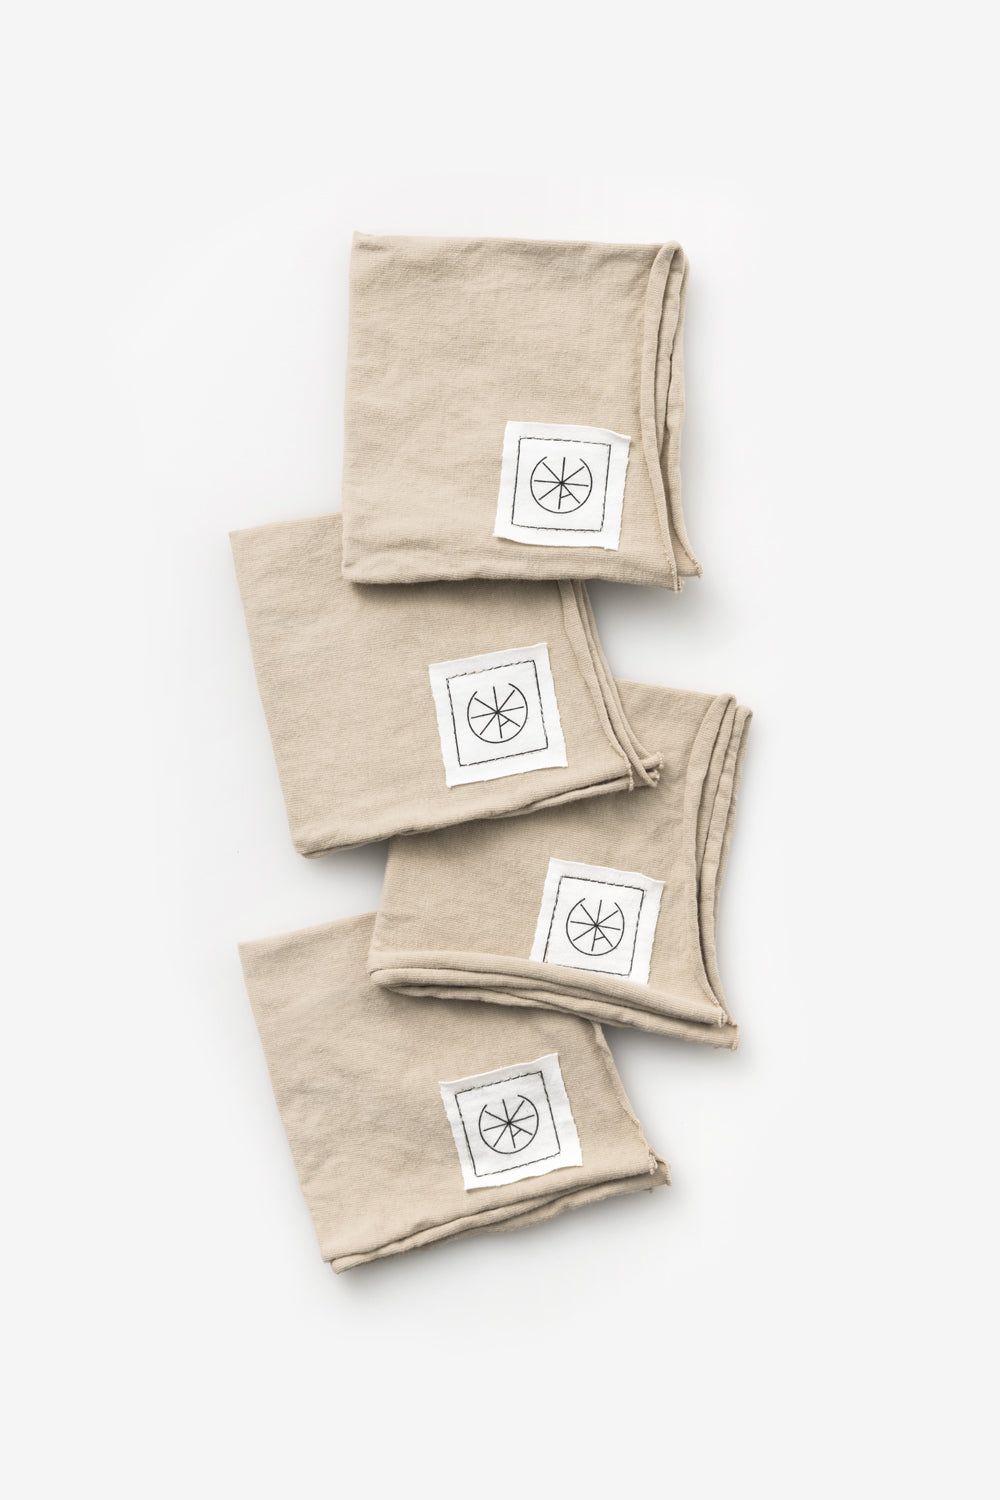 Alabama Chanin Cocktail Napkins in wax. Made with 100% organic cotton. 